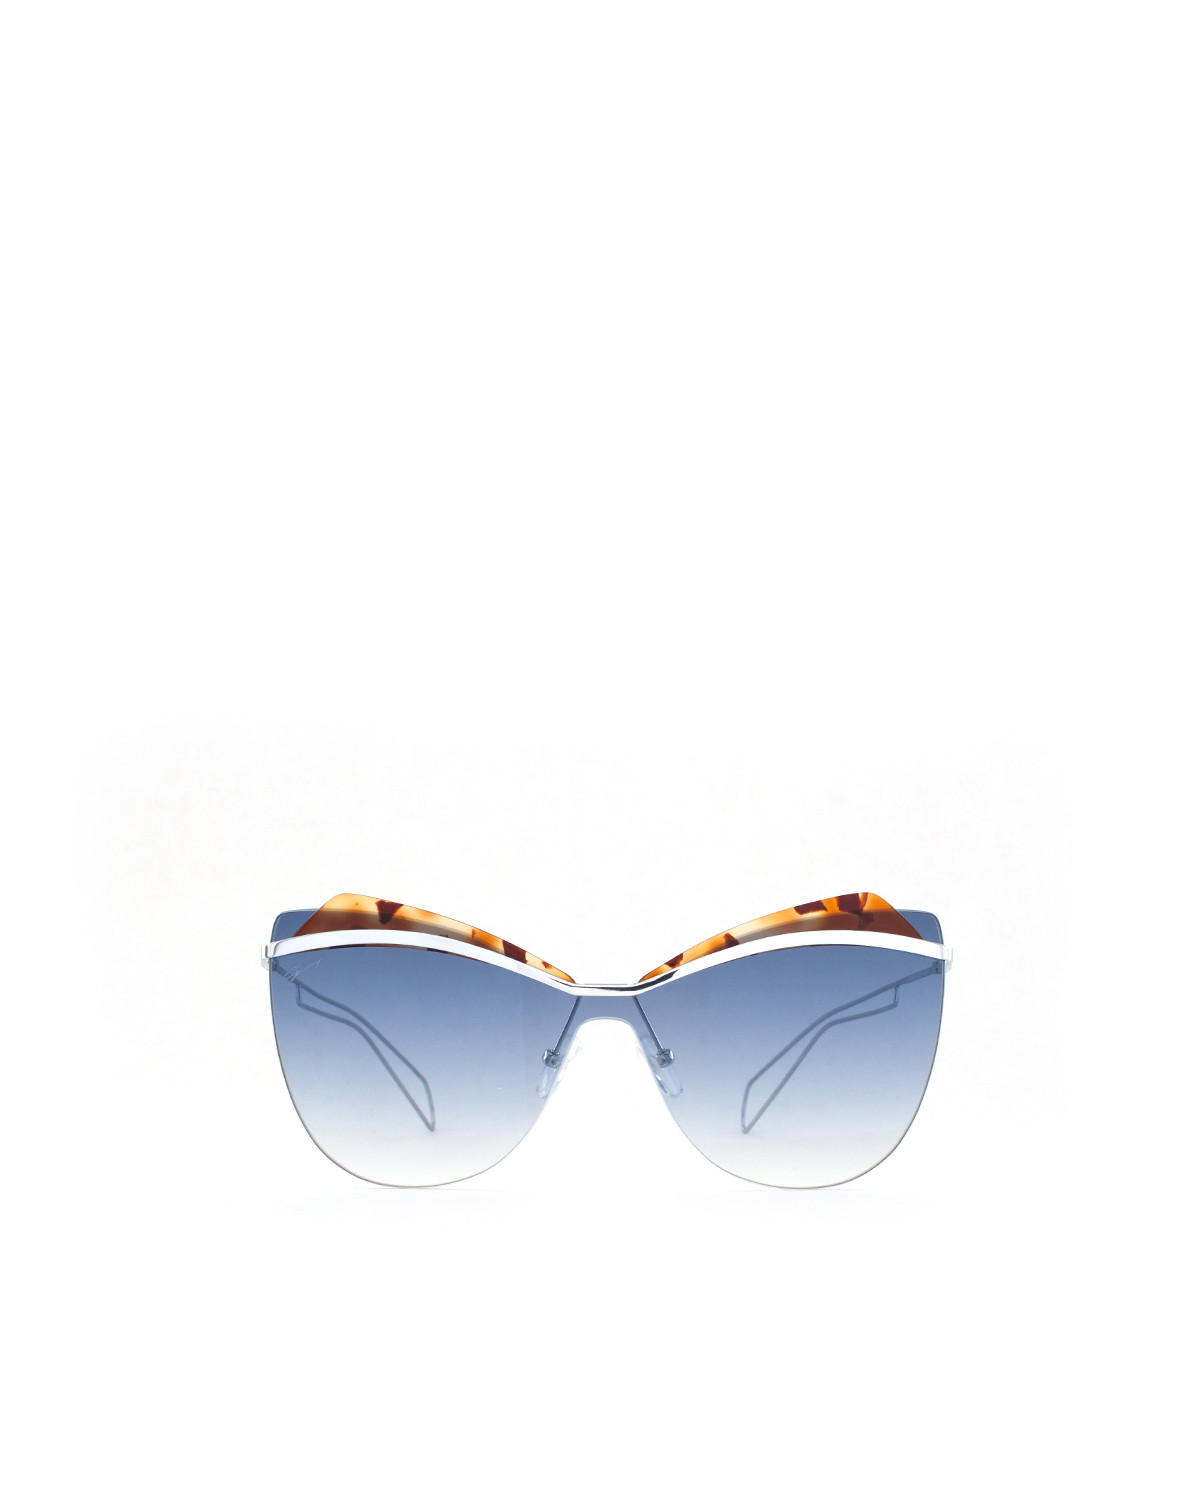 Blue cat-eye sunglasses with leopard print cut-out